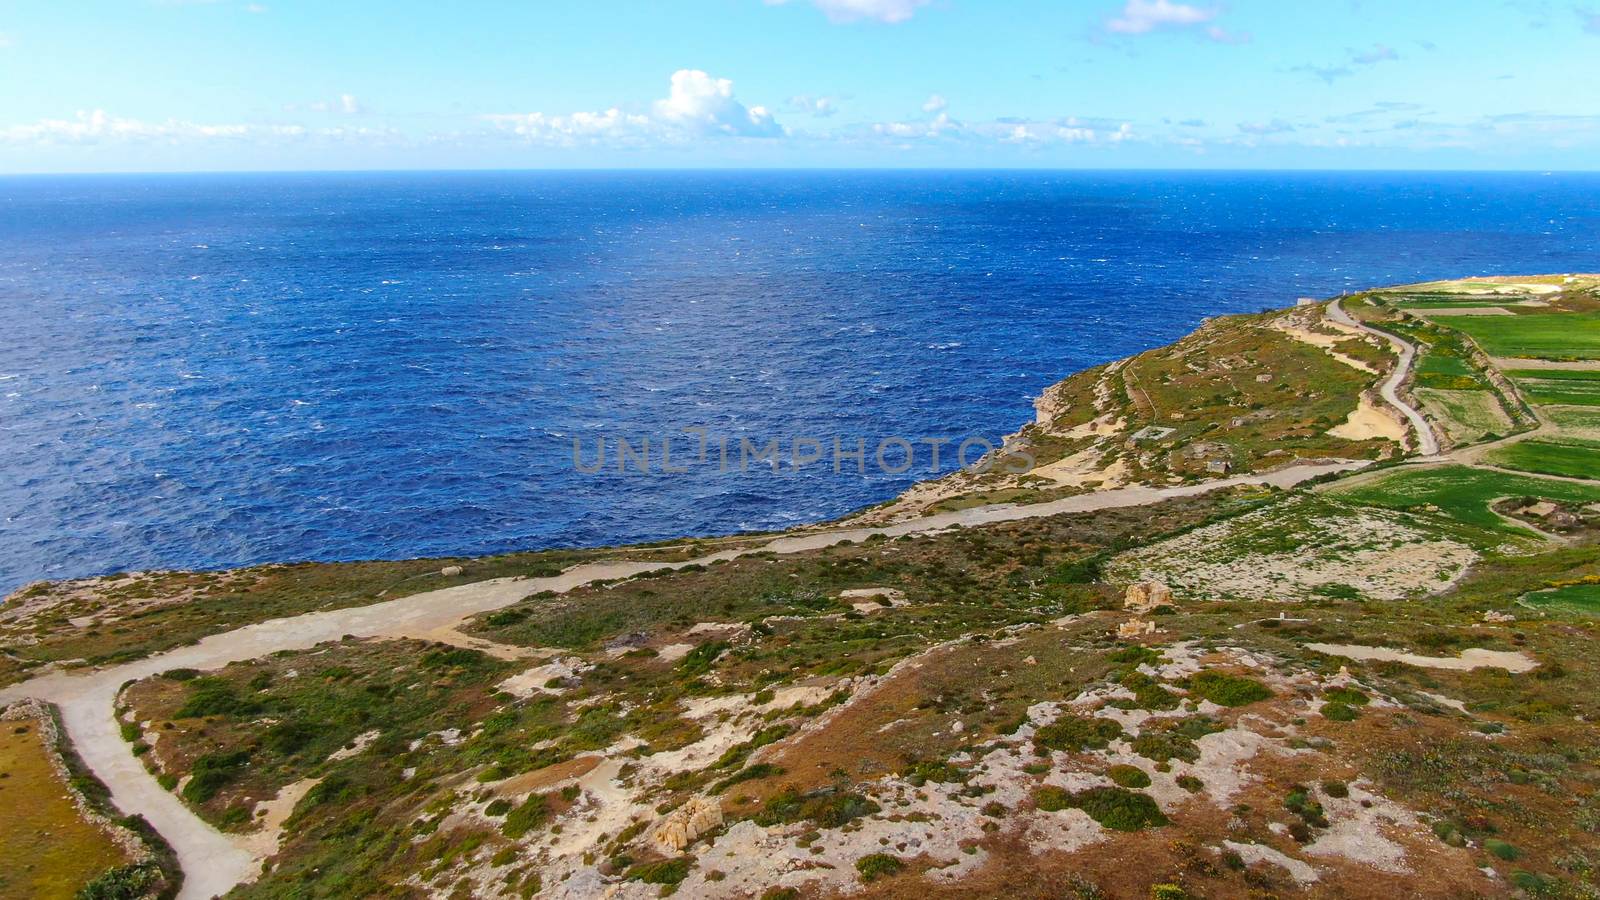 The Island of Gozo - Malta from above by Lattwein